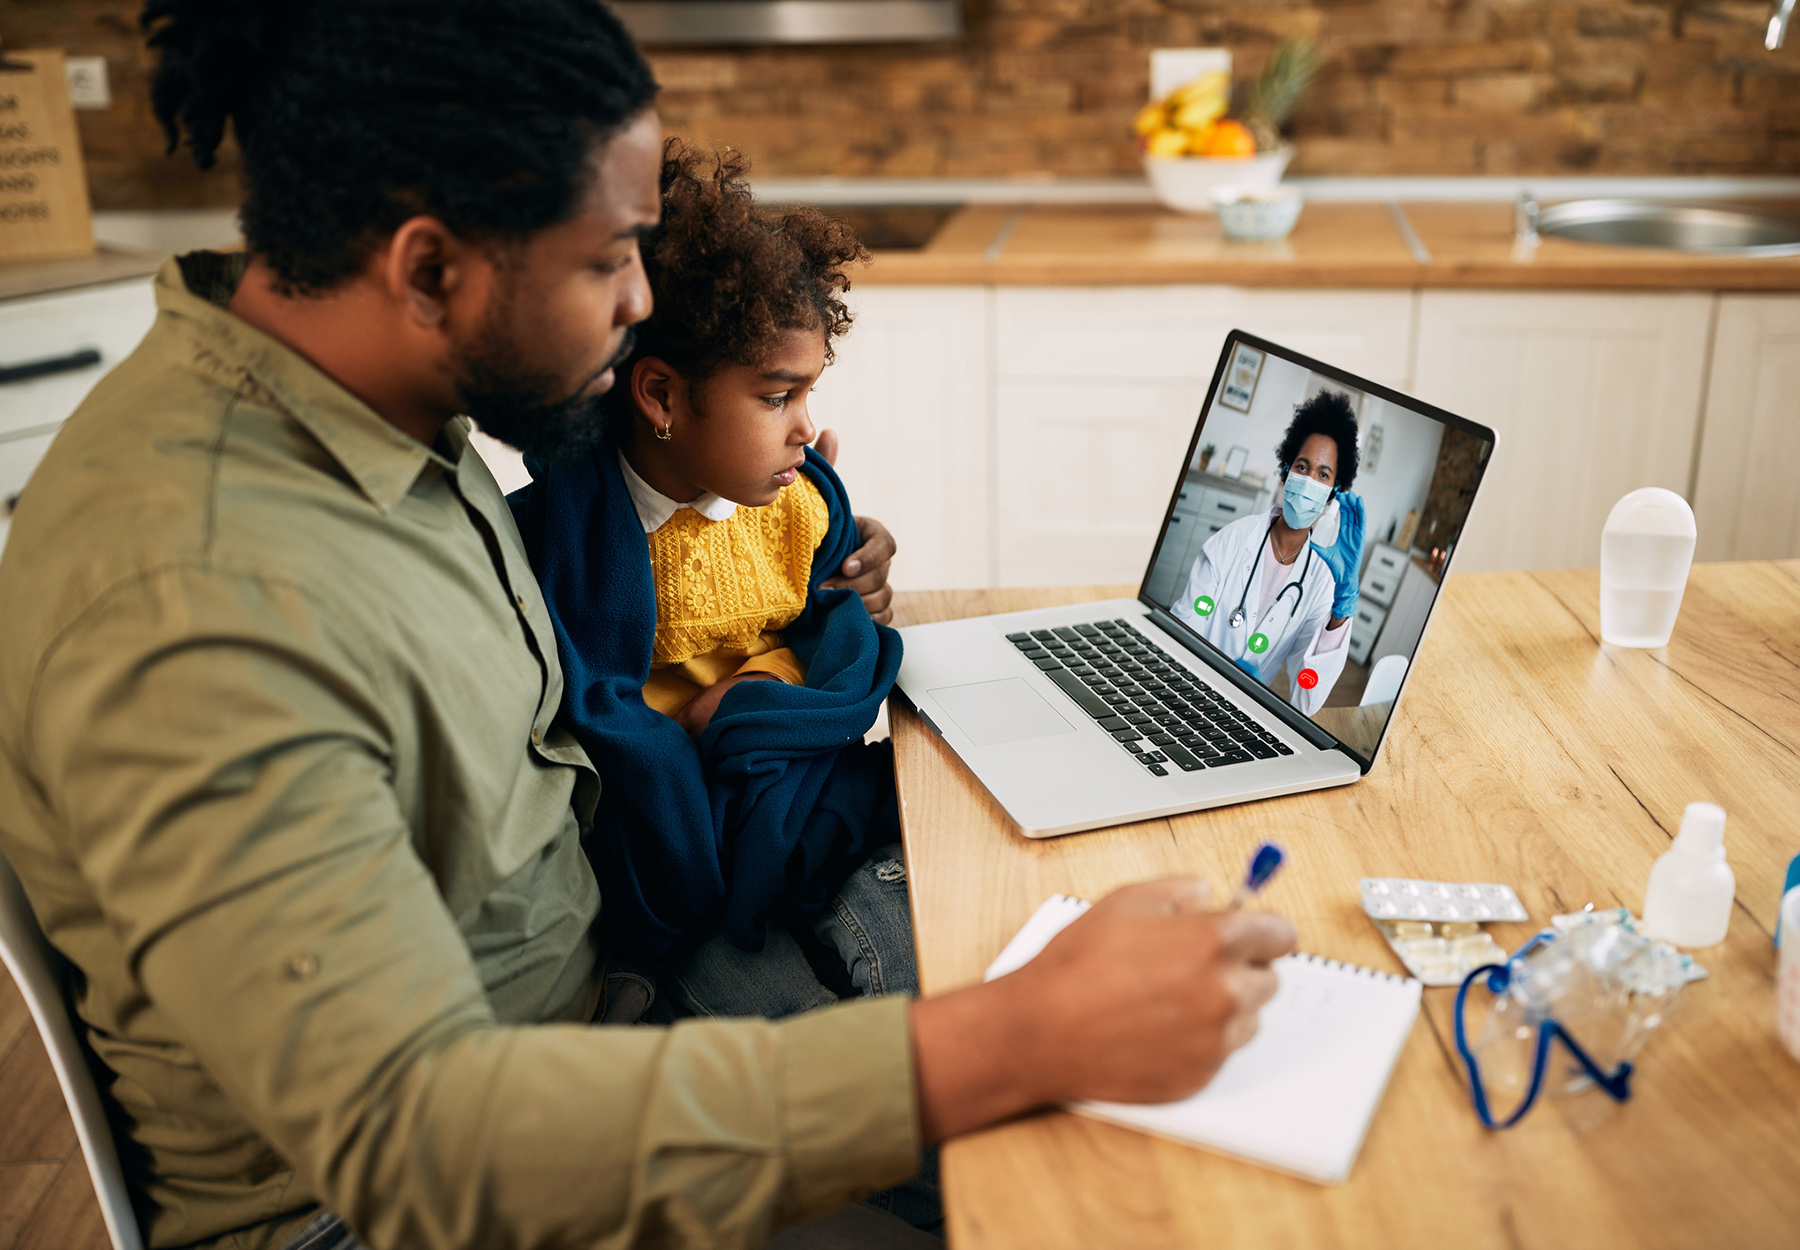 Stock image of Black father and daughter communicating with a doctor via video call from home during COVID-19 pandemic. Focus is on girl.